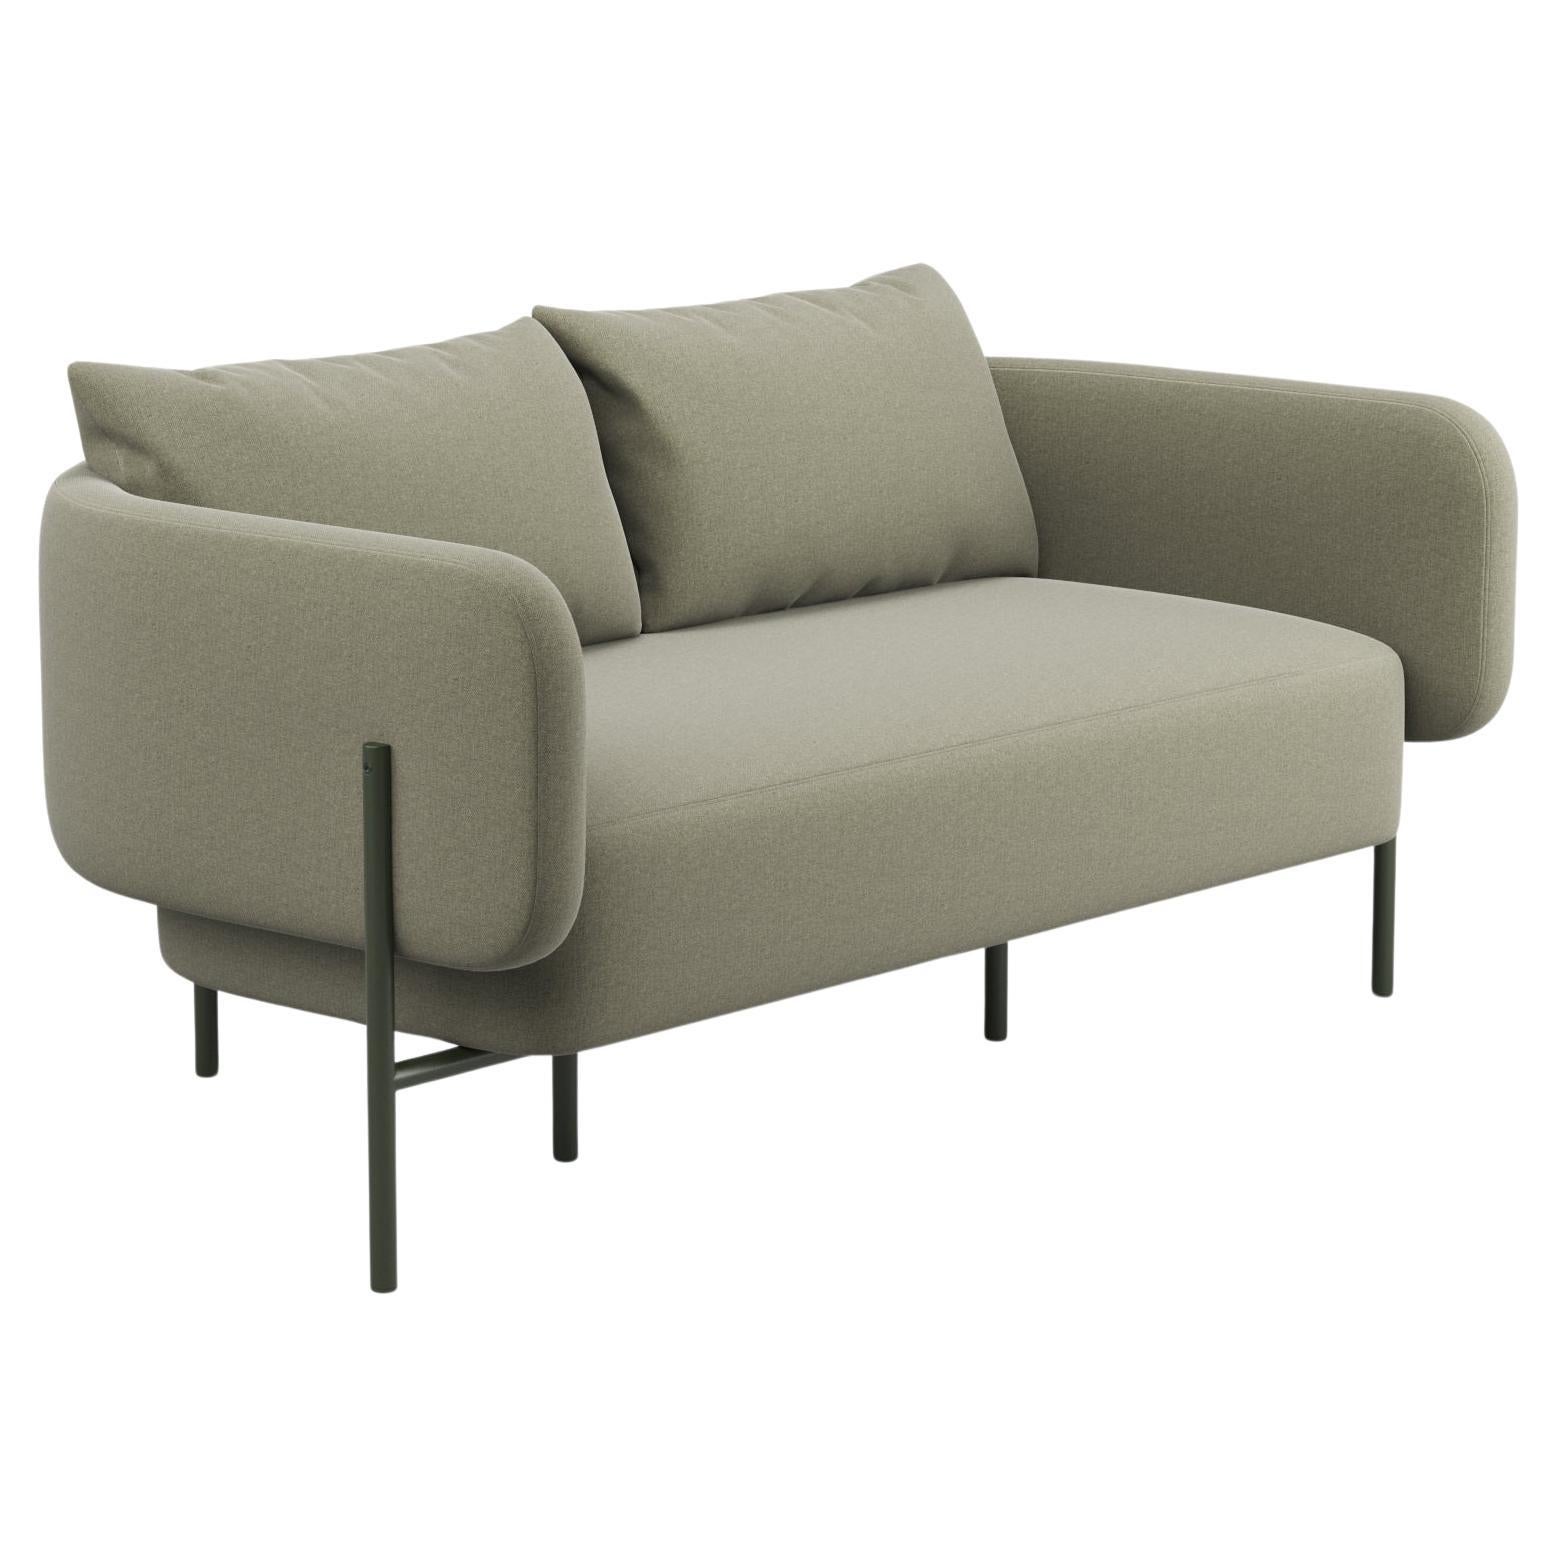 Hayche Abrazo 2 Seater Sofa - Green, UK, Made to Order For Sale